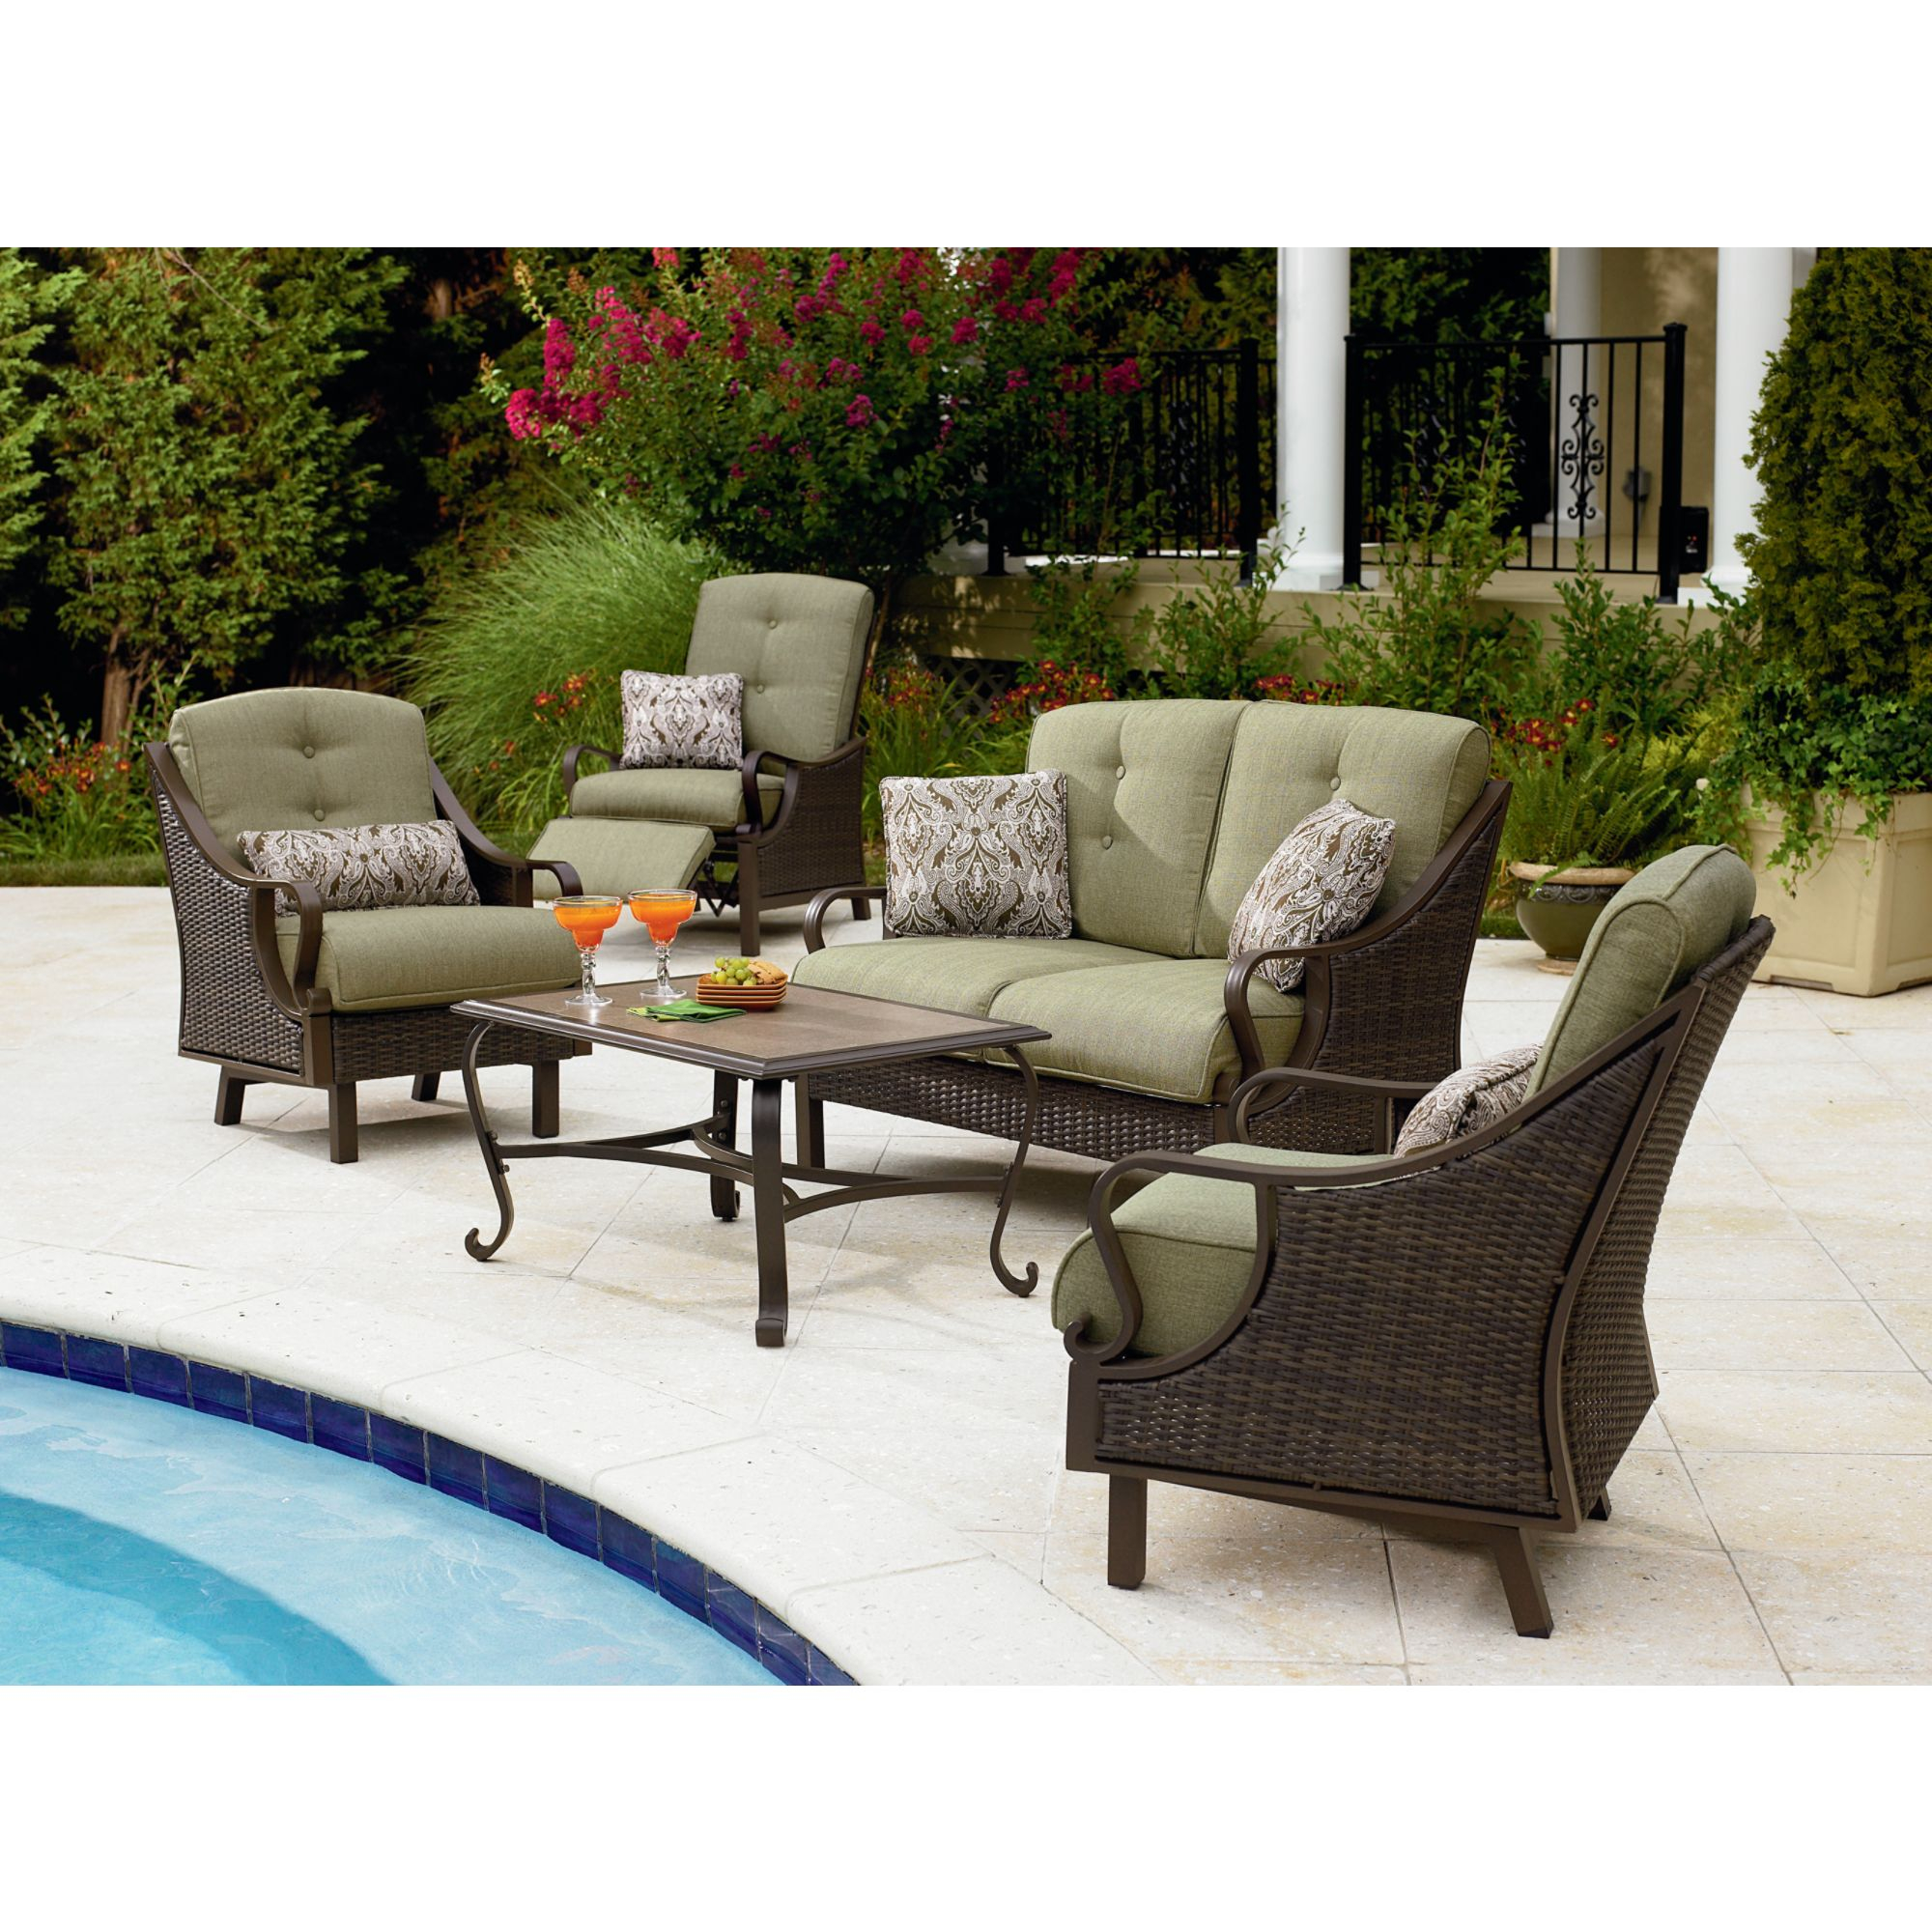 Sears Patio Furniture Personable Sears Patio Tables intended for proportions 2000 X 2000